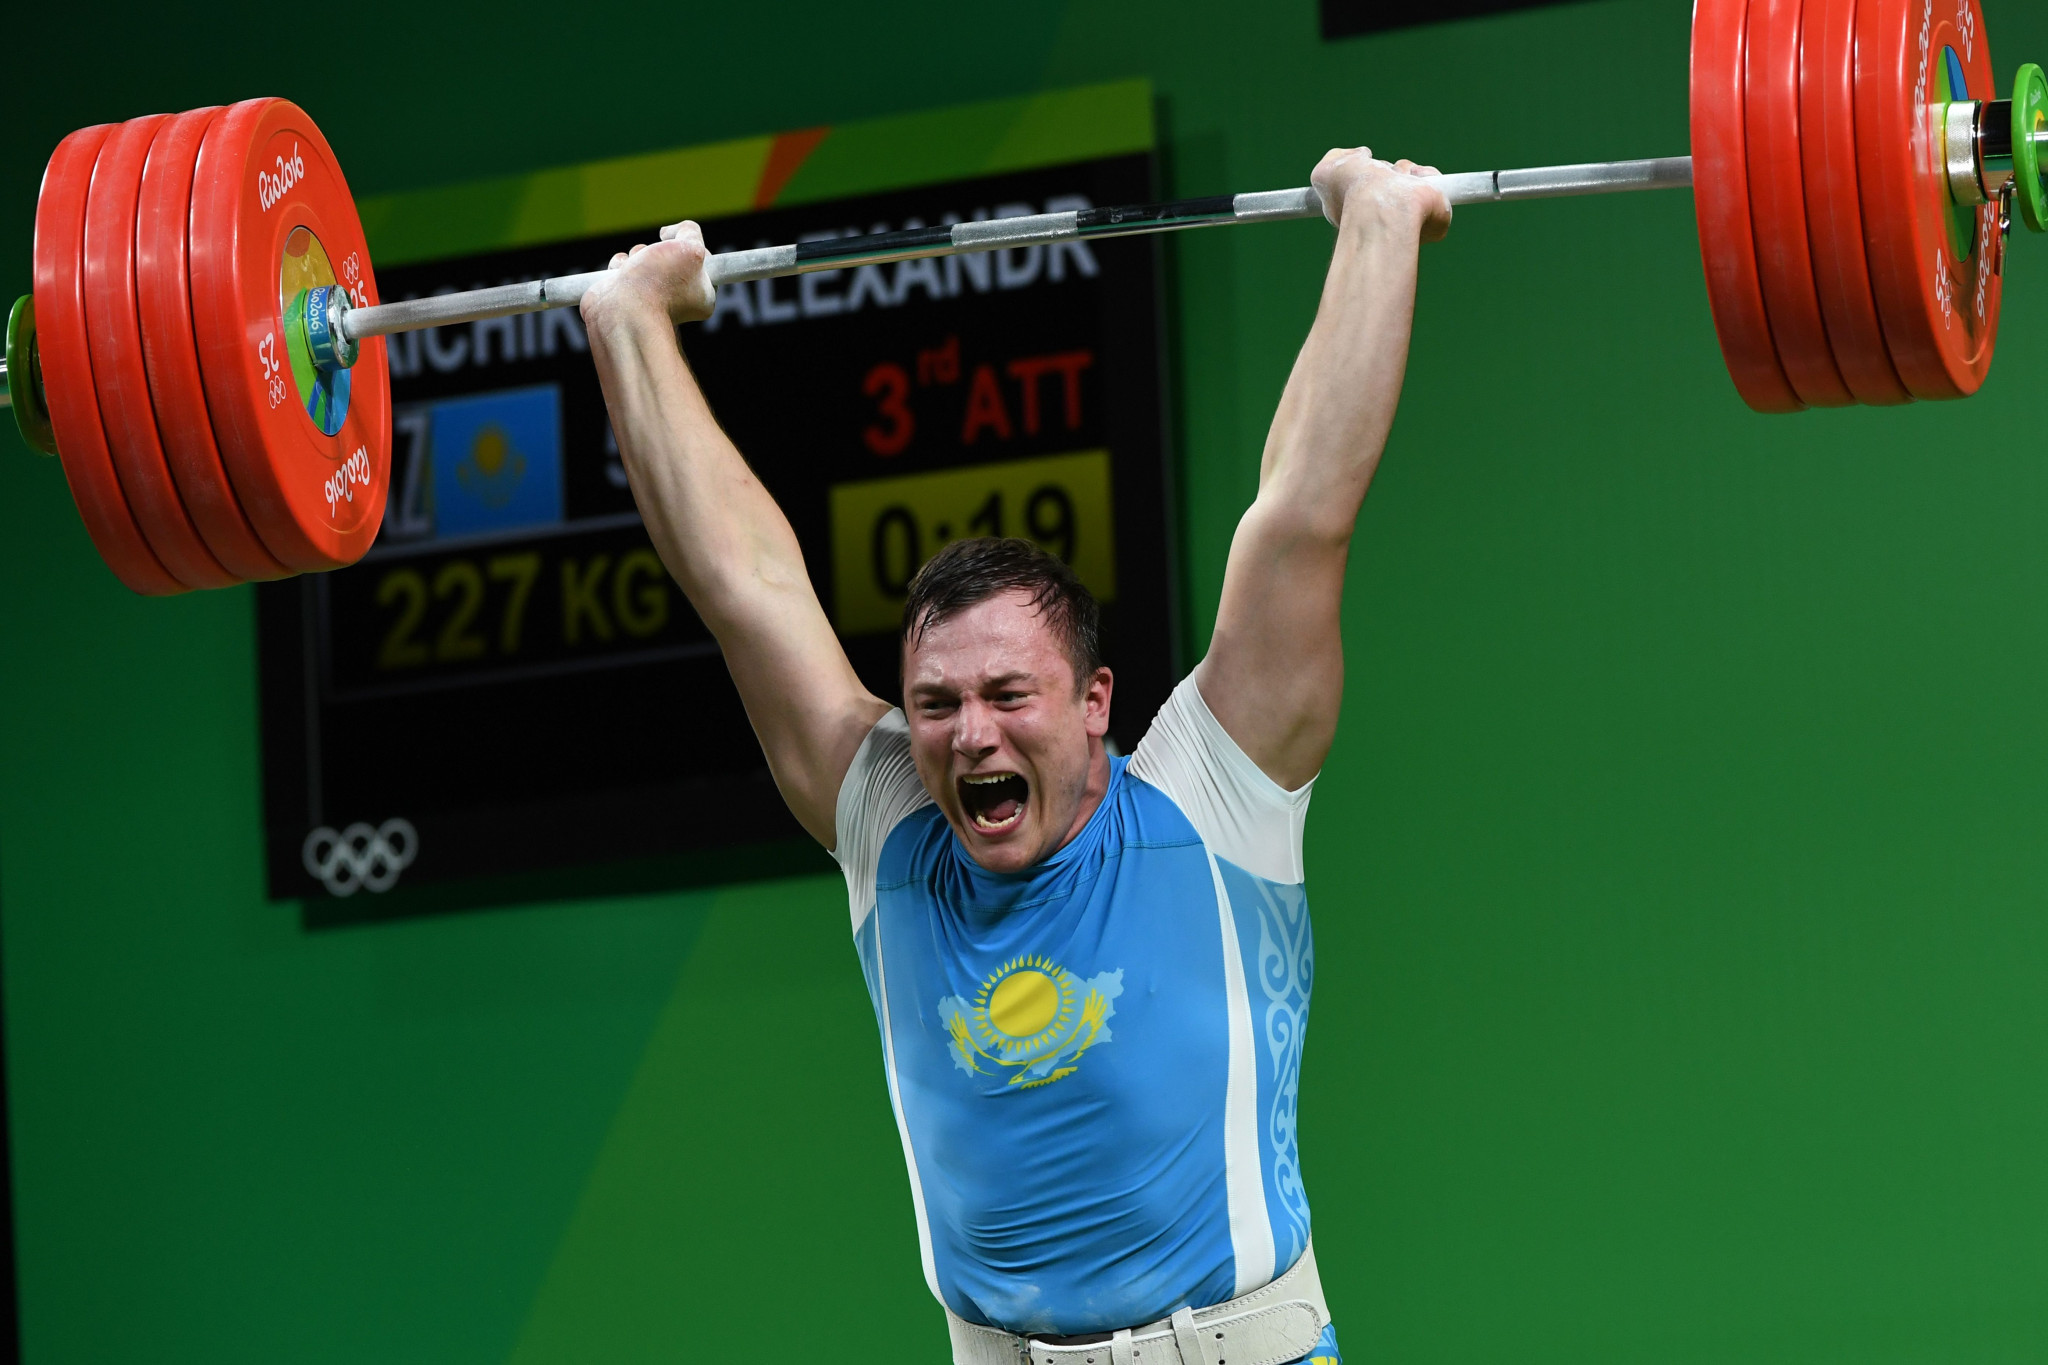 Alexandr Zaichikov, a 2015 world champion and 2016 Olympic bronze medallist, is another high profile Kazakh weightlifter to have served a drugs ban ©Getty Images